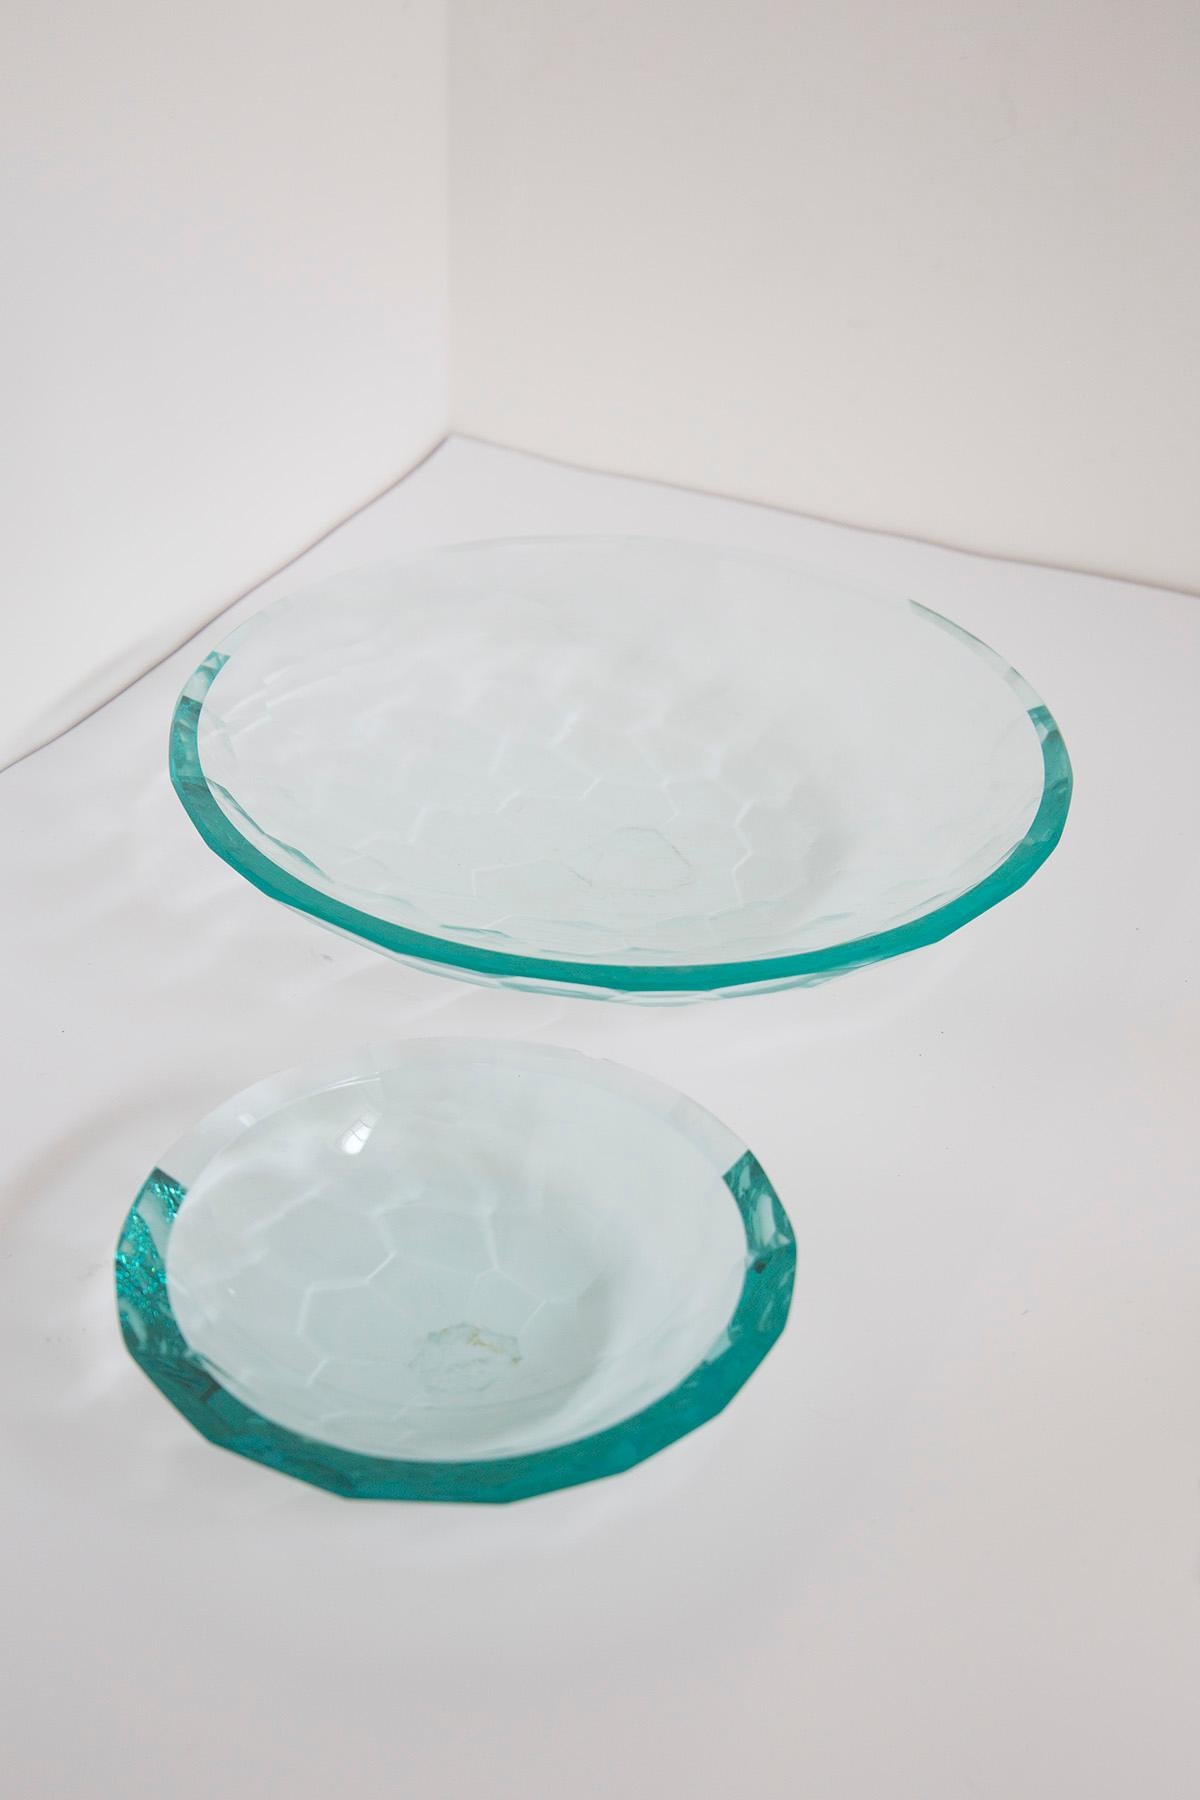 Elegant pair of centerpieces made of thick glass using a hand-tabbed technique. The pair is in the style of the great Fontana Arte manufacture made in the 1980s.
In the pair we find two bowls one larger and one smaller. The thick glass creates color